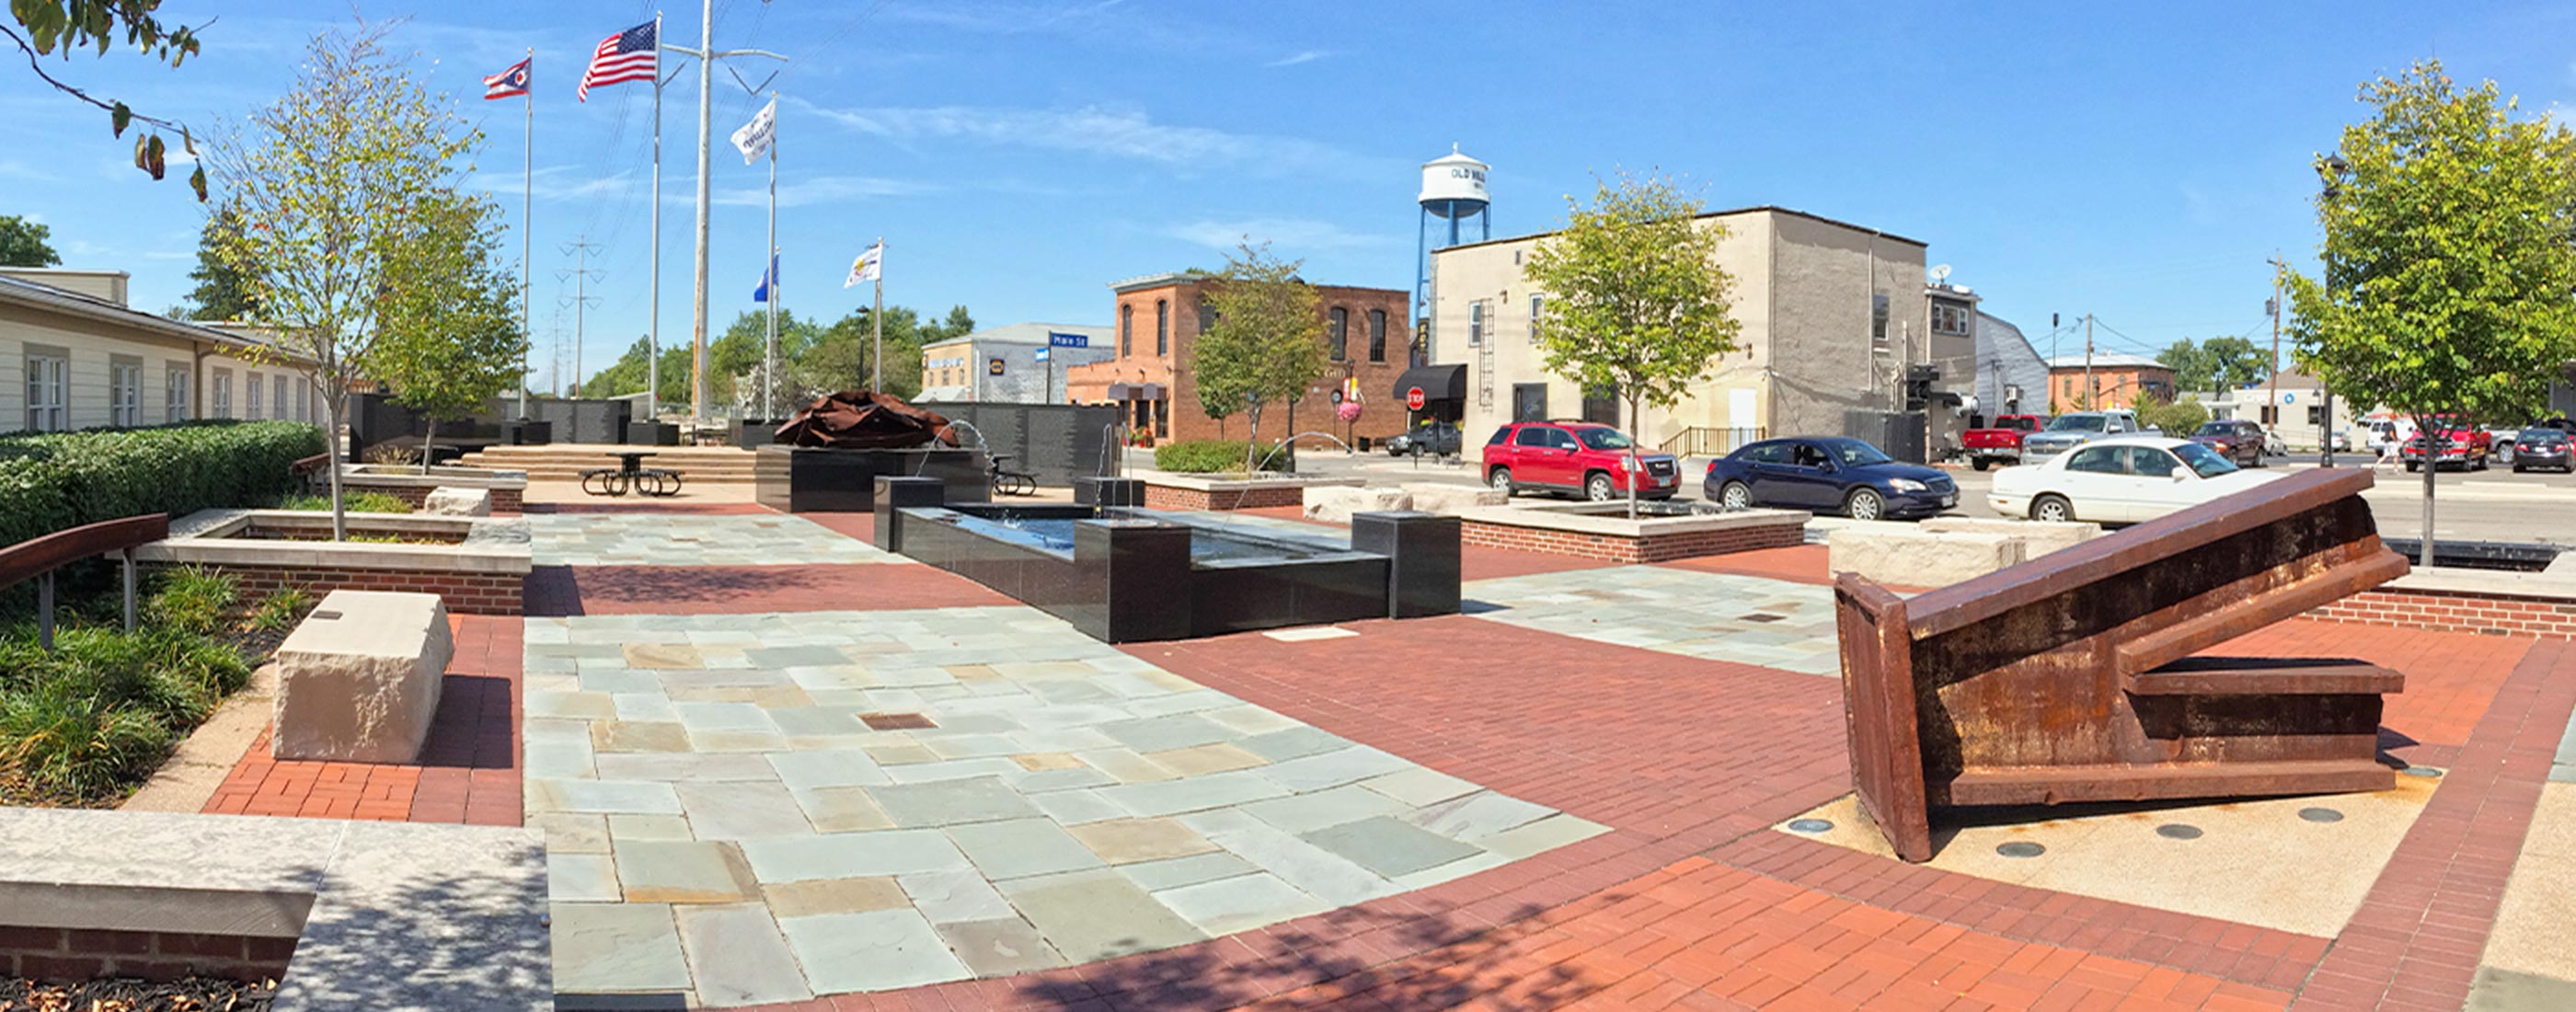 Hilliard First Responders Park is made up of a series of contemplative spaces, and incorporates fountain features, seating areas, sculptures, and memorial monuments.